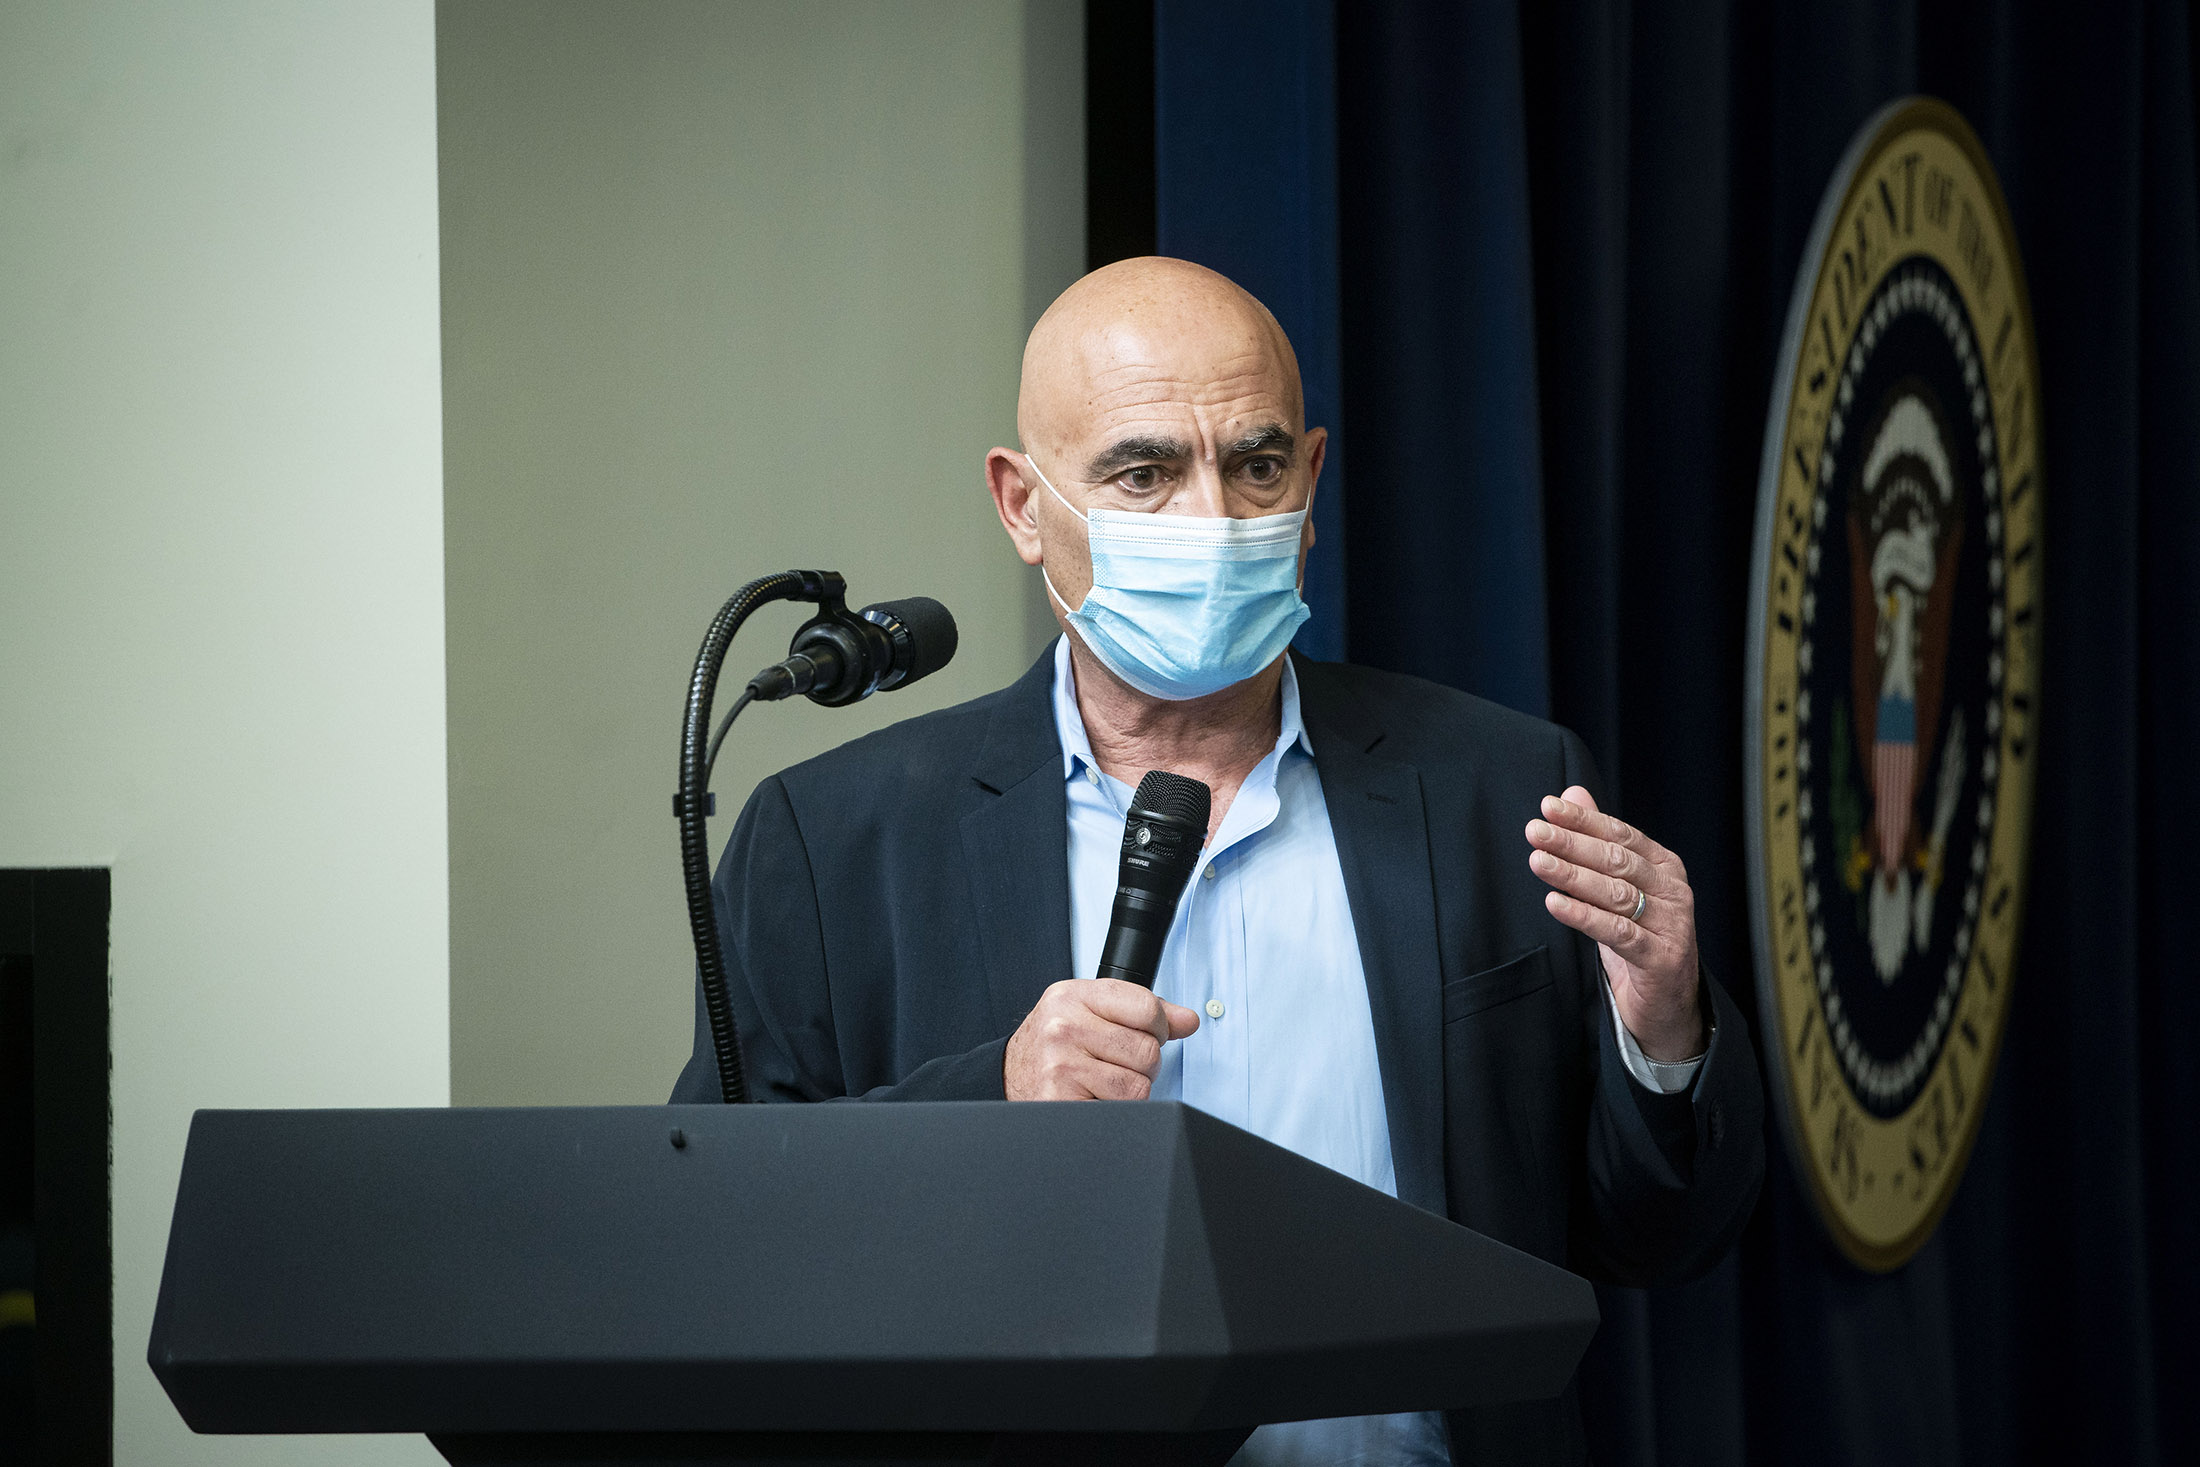 Moncef Slaoui, the chief adviser for the Defense Department's Project Warp Speed, speaks during an Operation Warp Speed vaccine summit at the White House in Washington, DC, on Tuesday, Dec. 8. 